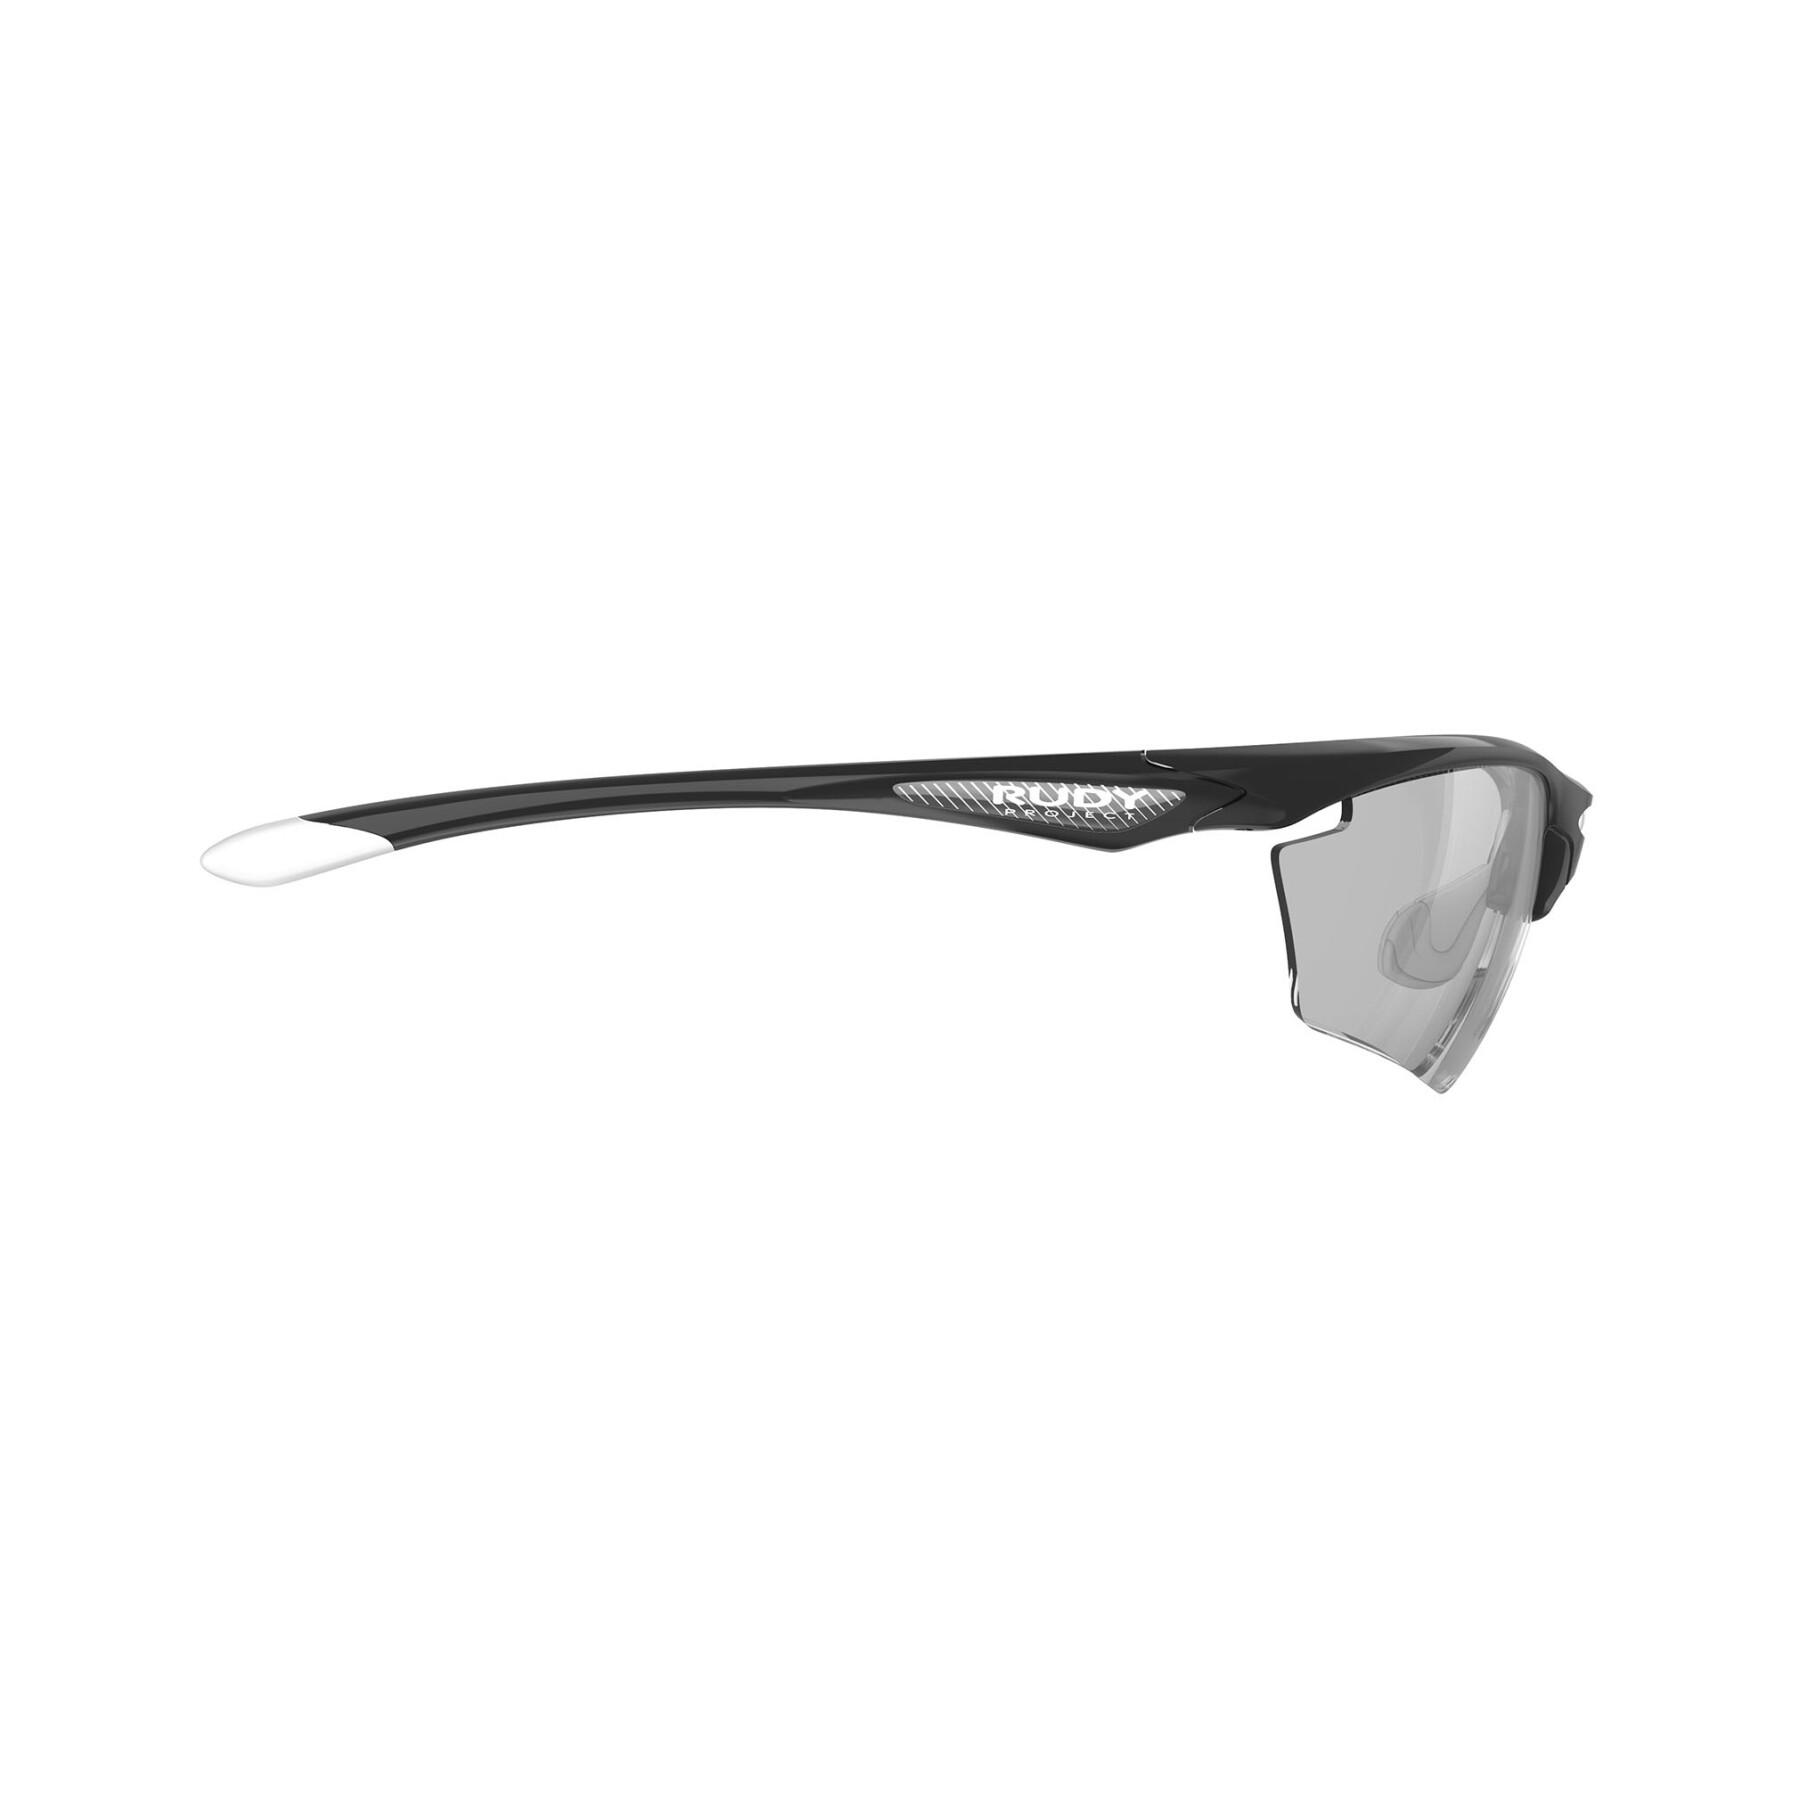 Performance glasses Rudy Project stratofly